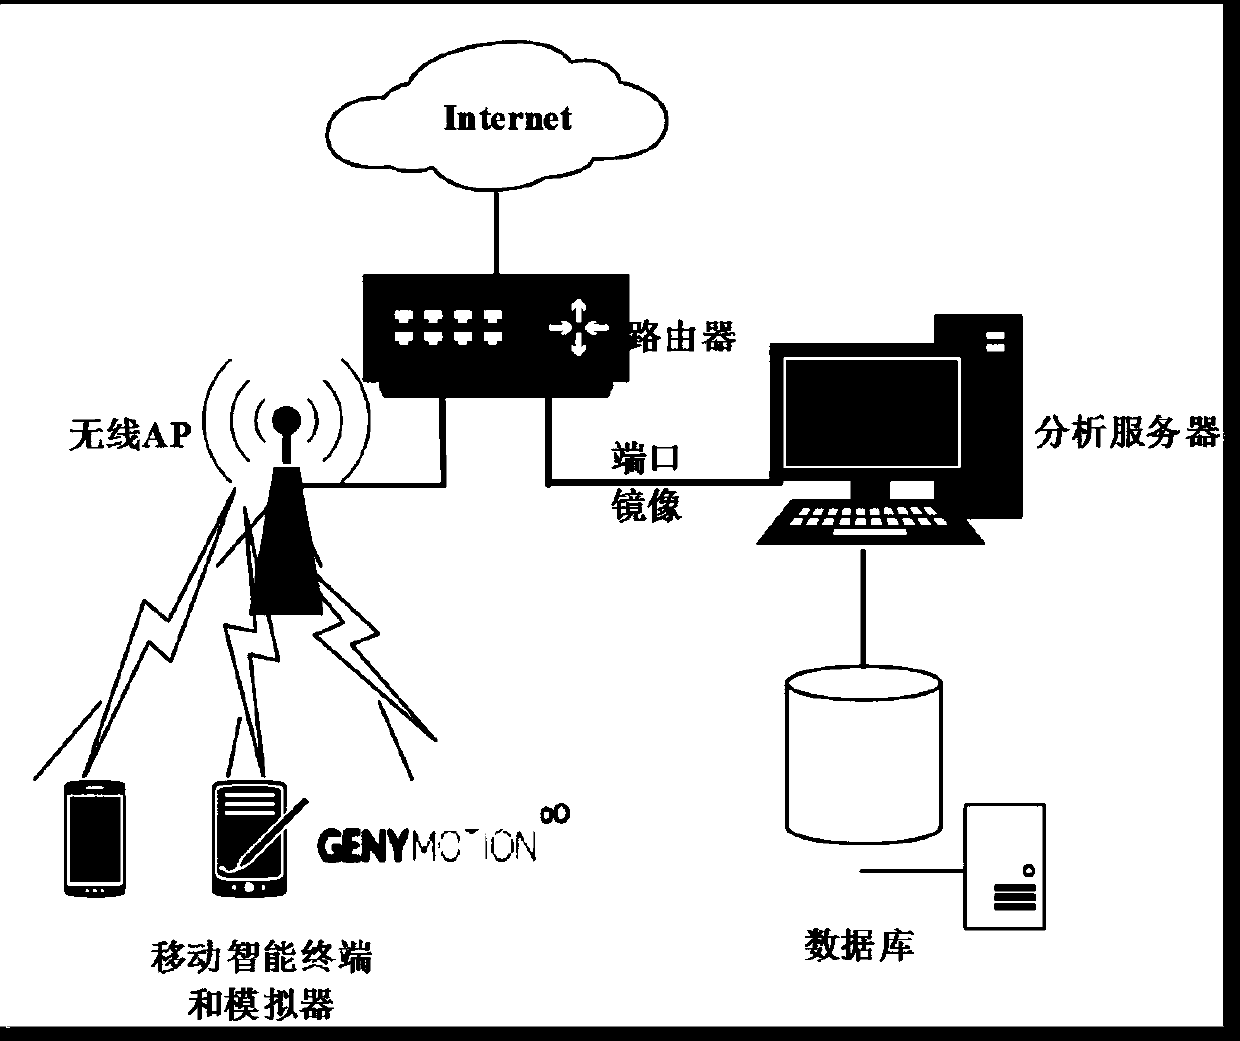 Mobile malware detection method oriented on network encryption flow